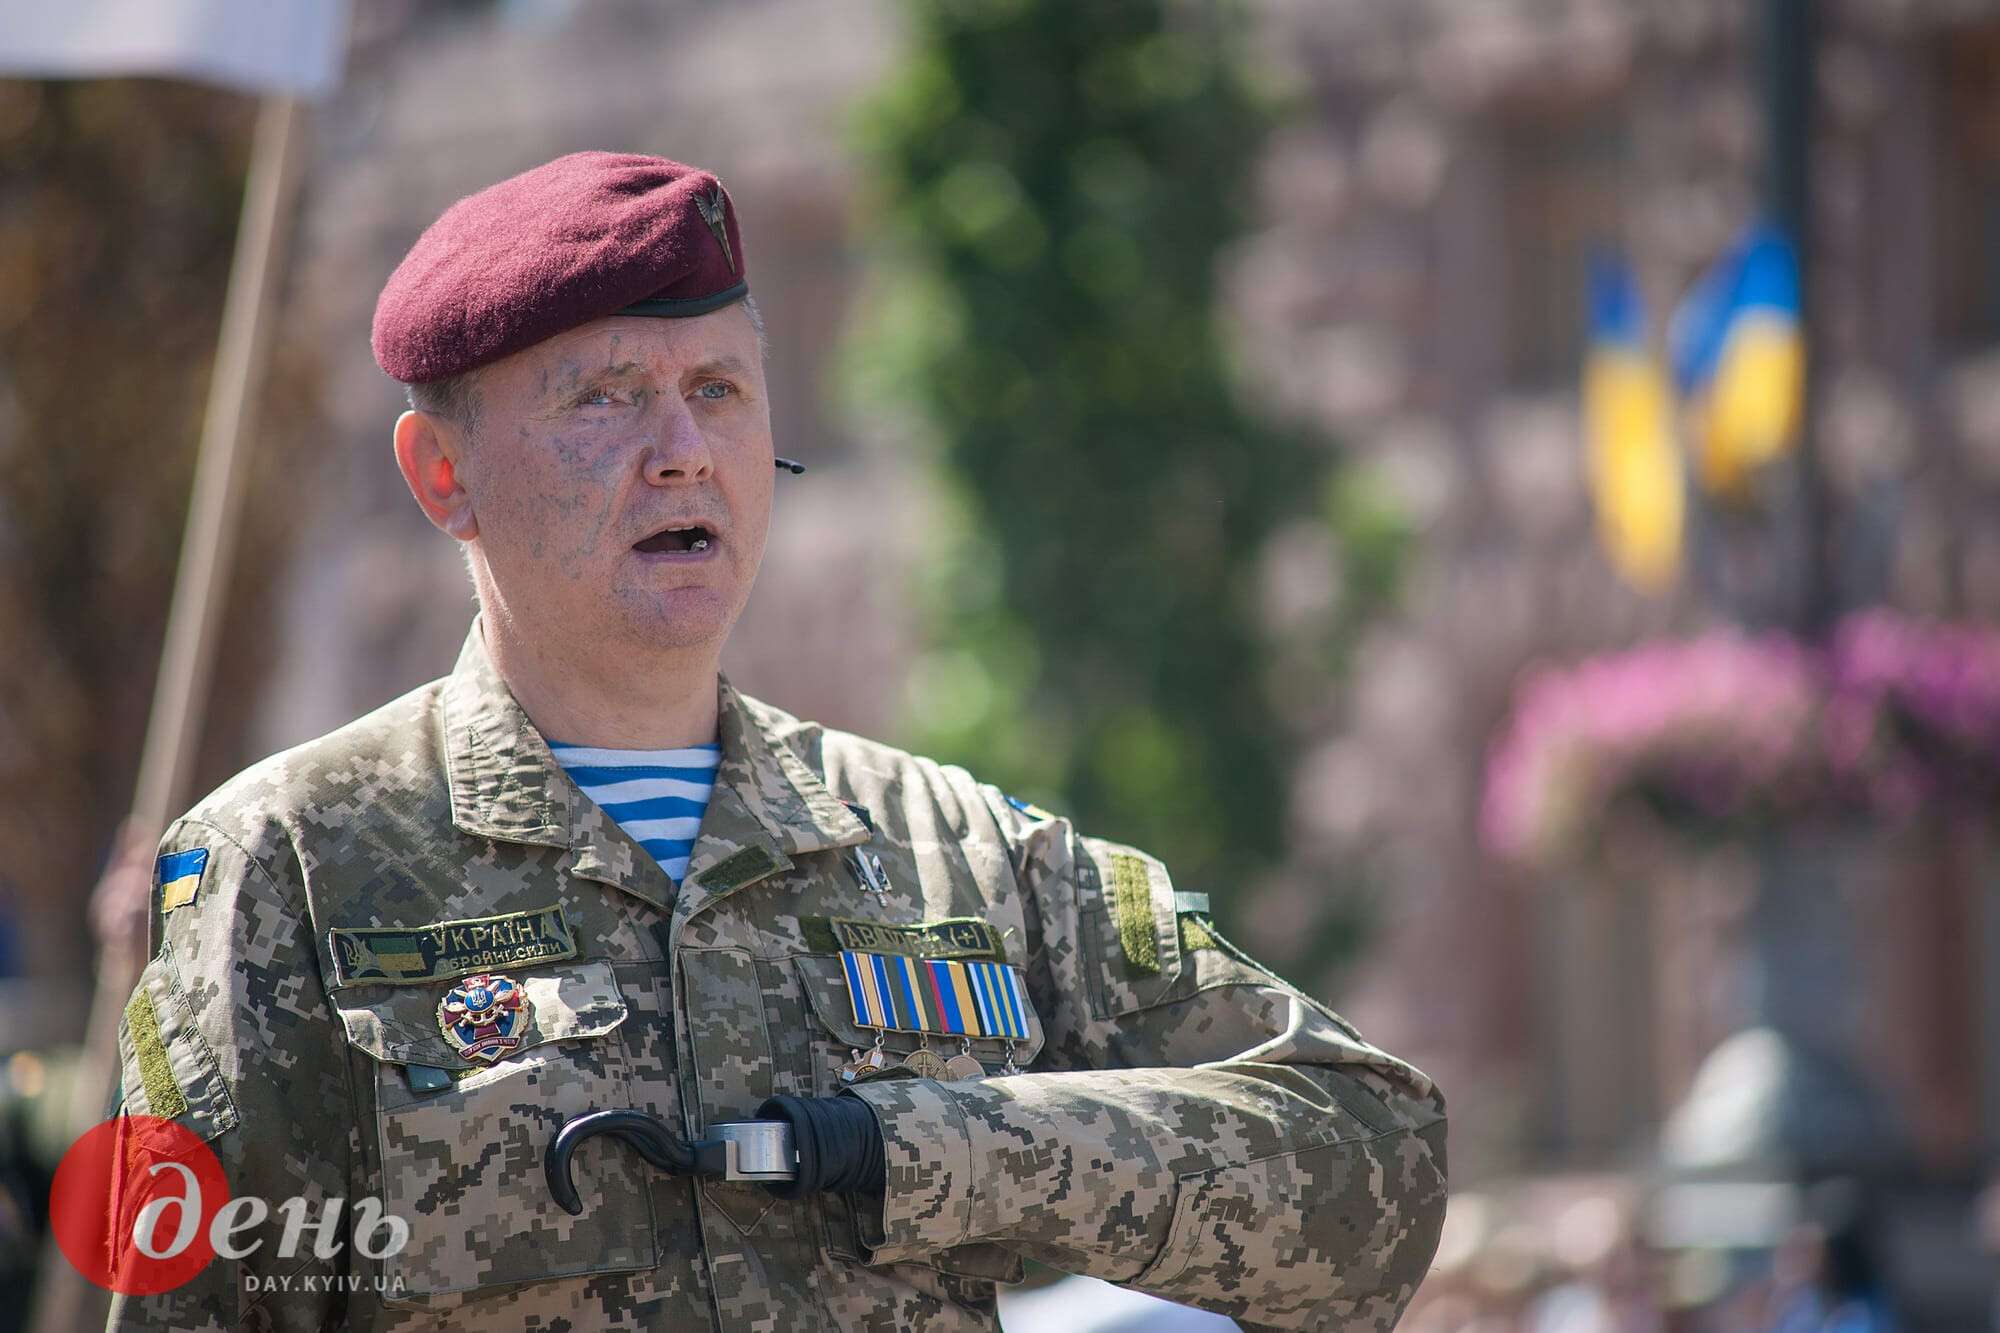 Kyiv, Ukraine - August 24, 2019: Disabled war veteran man with prosthetic hand during march on Independence Day of Ukrainian veterans of Russian-Ukrainian war, volunteers and relatives of soldiers